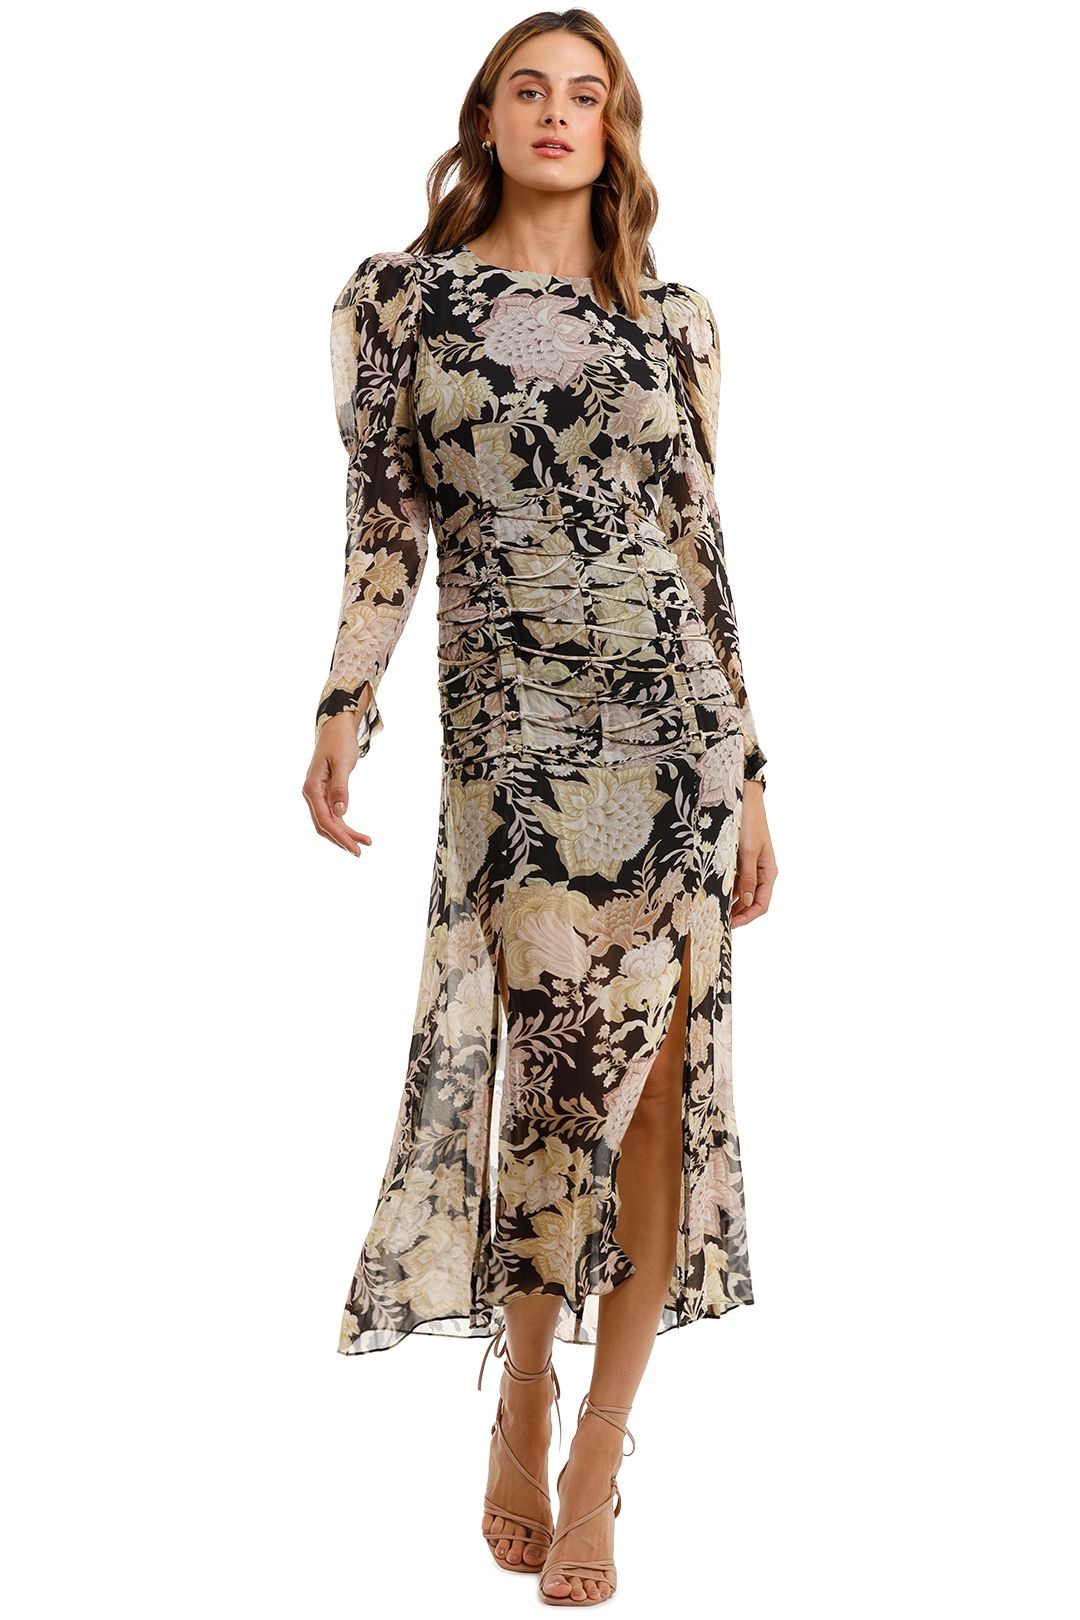 Thurley Aphrodite Long Sleeves Dress floral